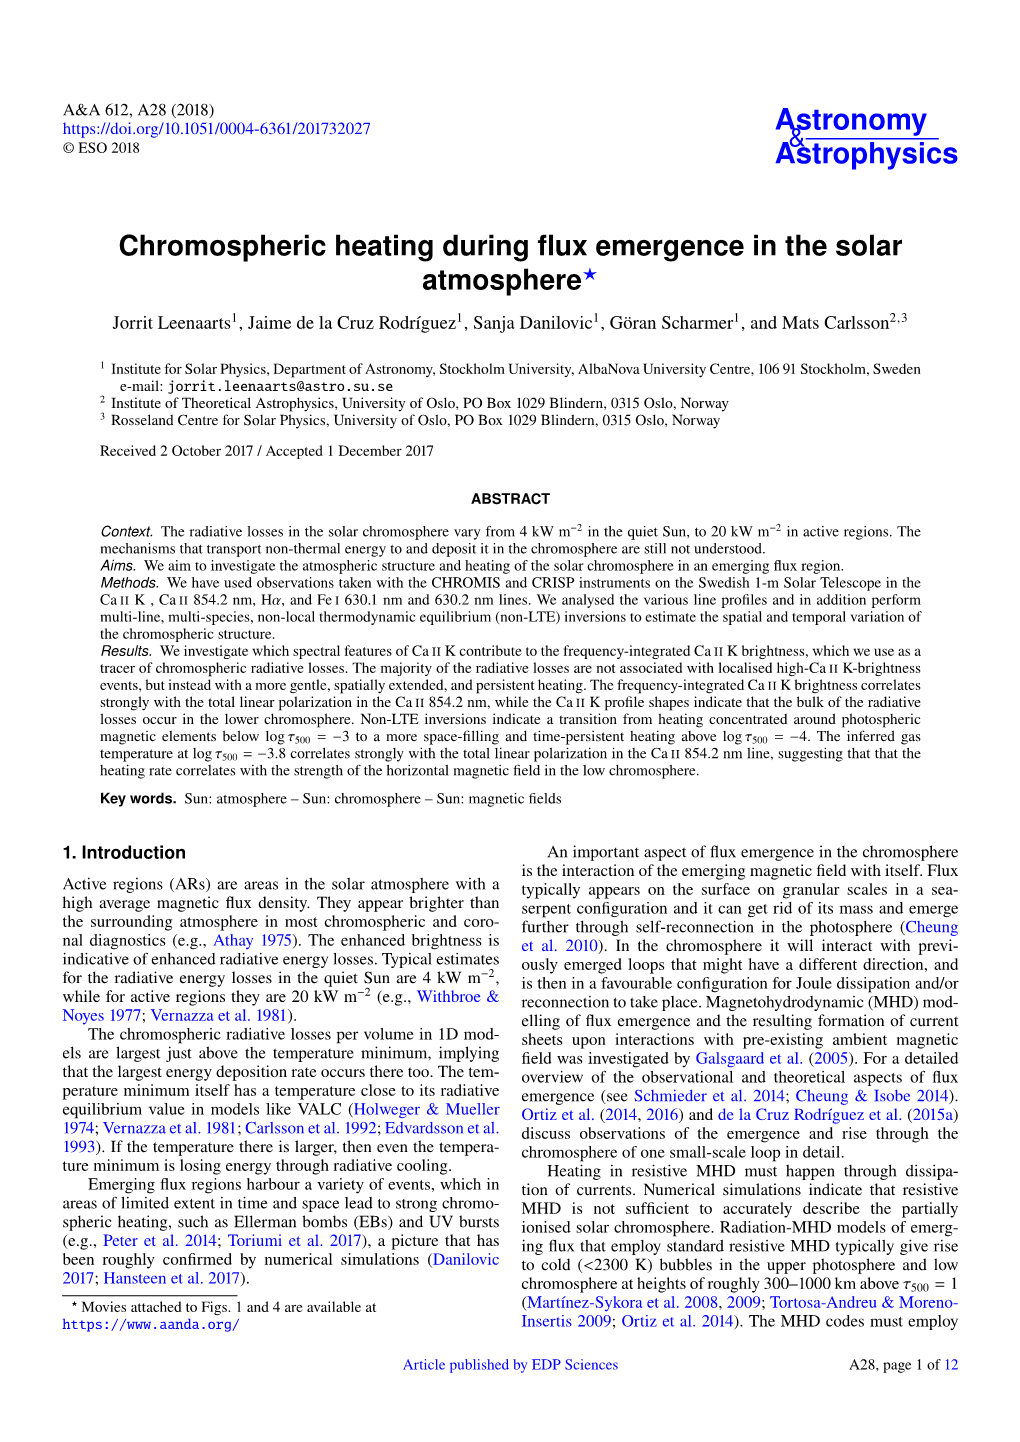 Chromospheric Heating During Flux Emergence in the Solar Atmosphere